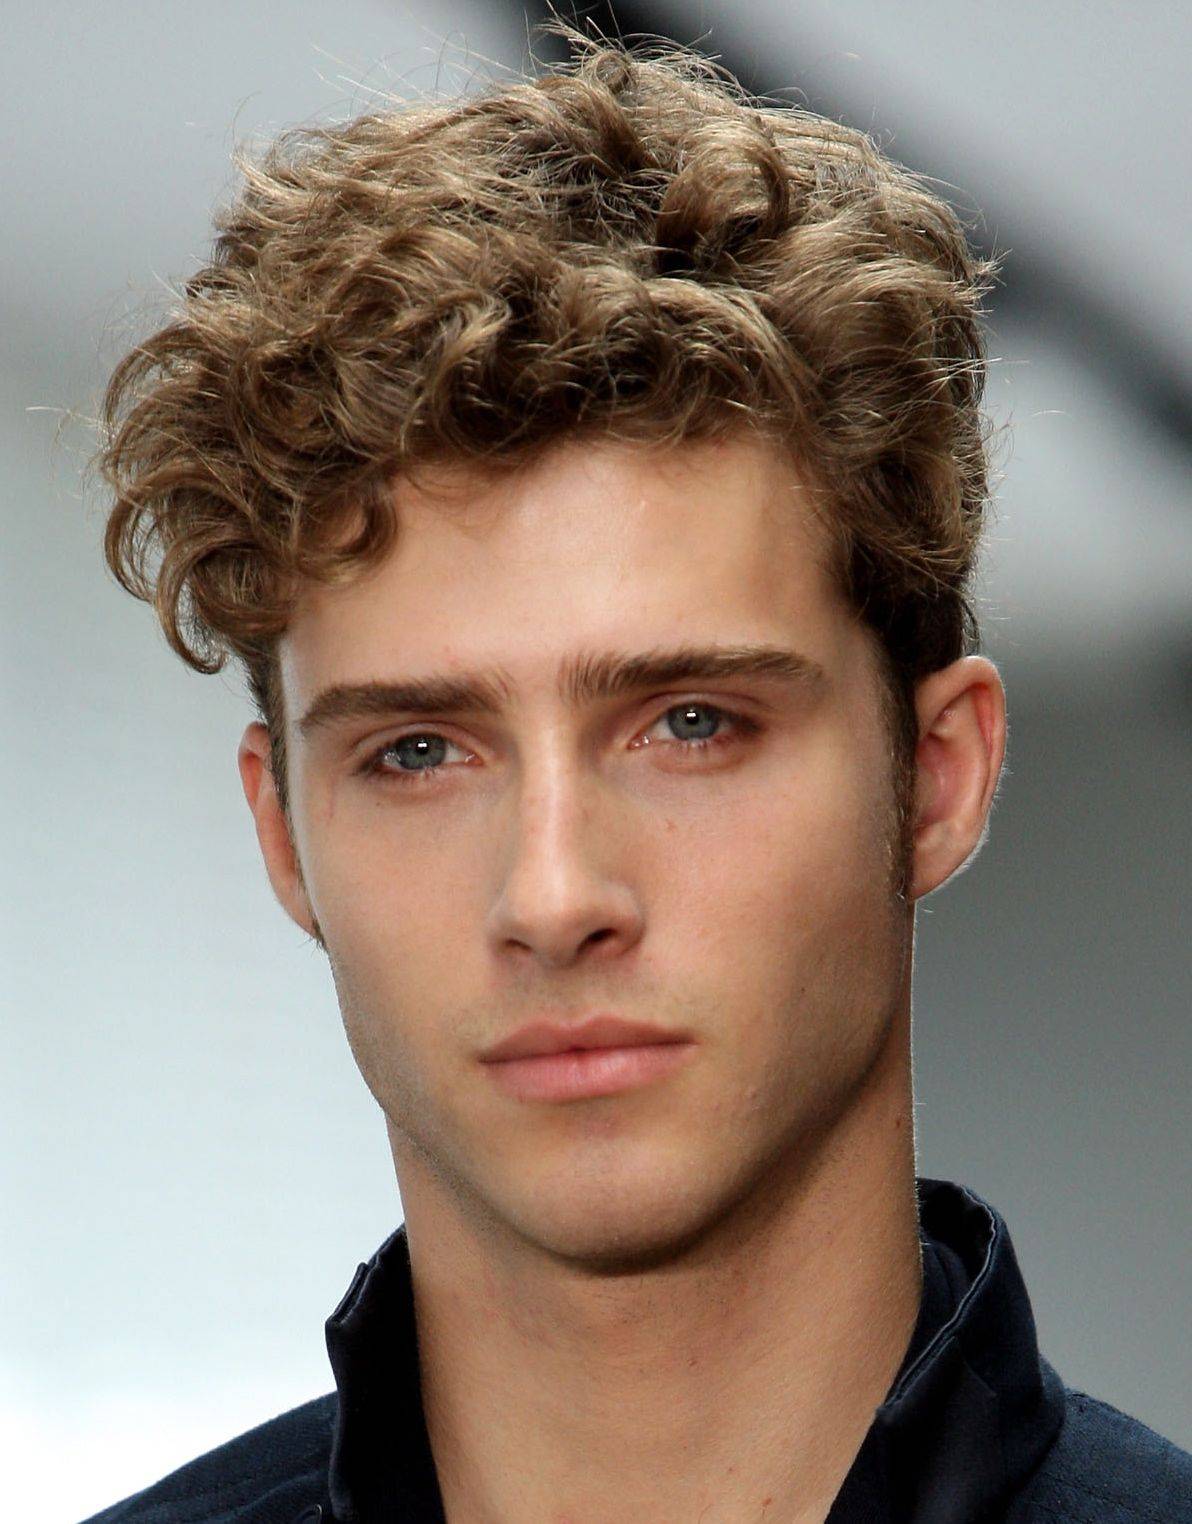 Hair Styles & Haircuts: Curly Hairstyles For Men